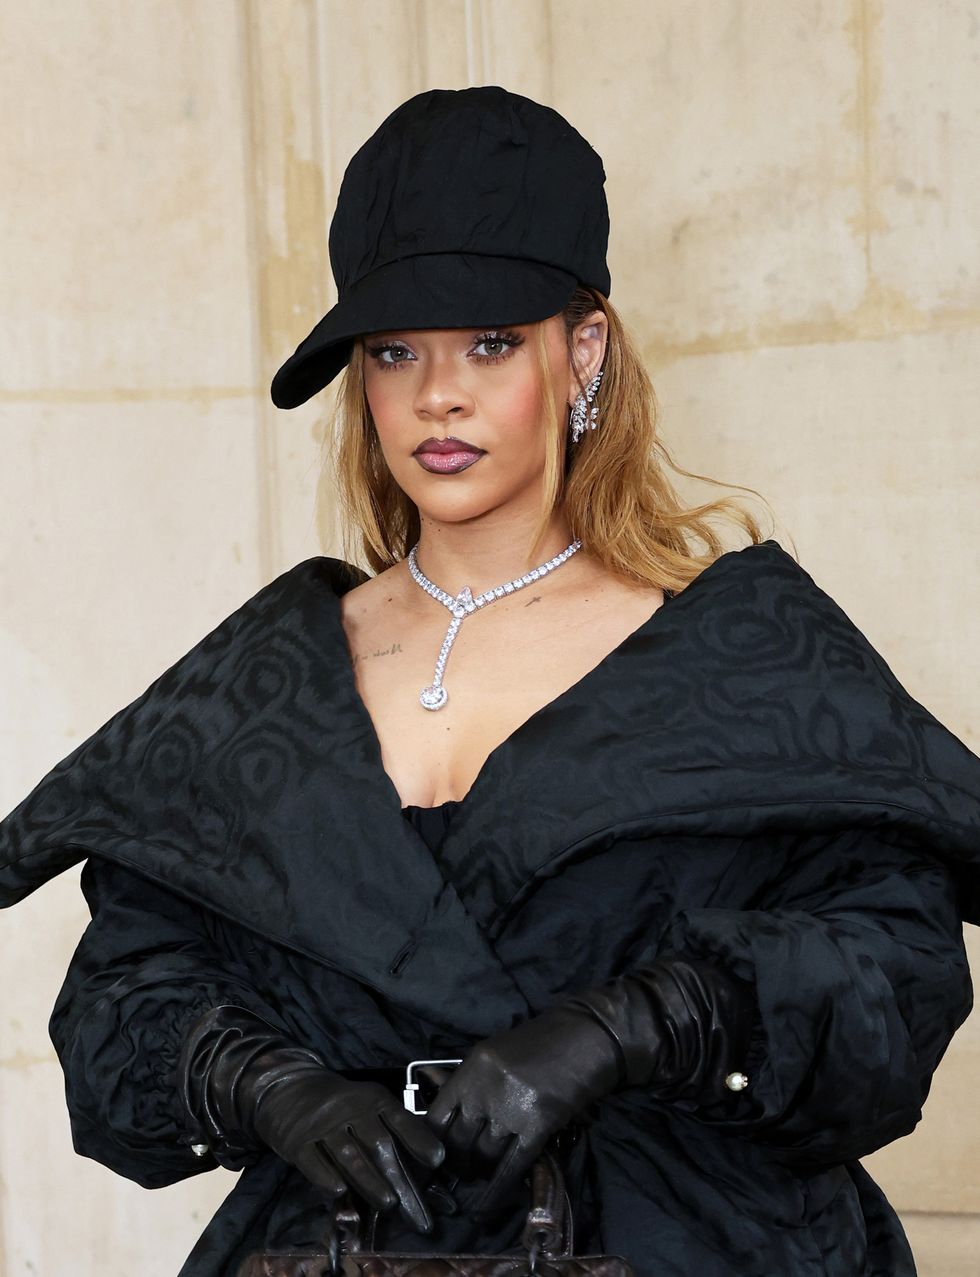 Rihanna Wears Black Belted Dress, Jacket, and Diamonds at Dior Show